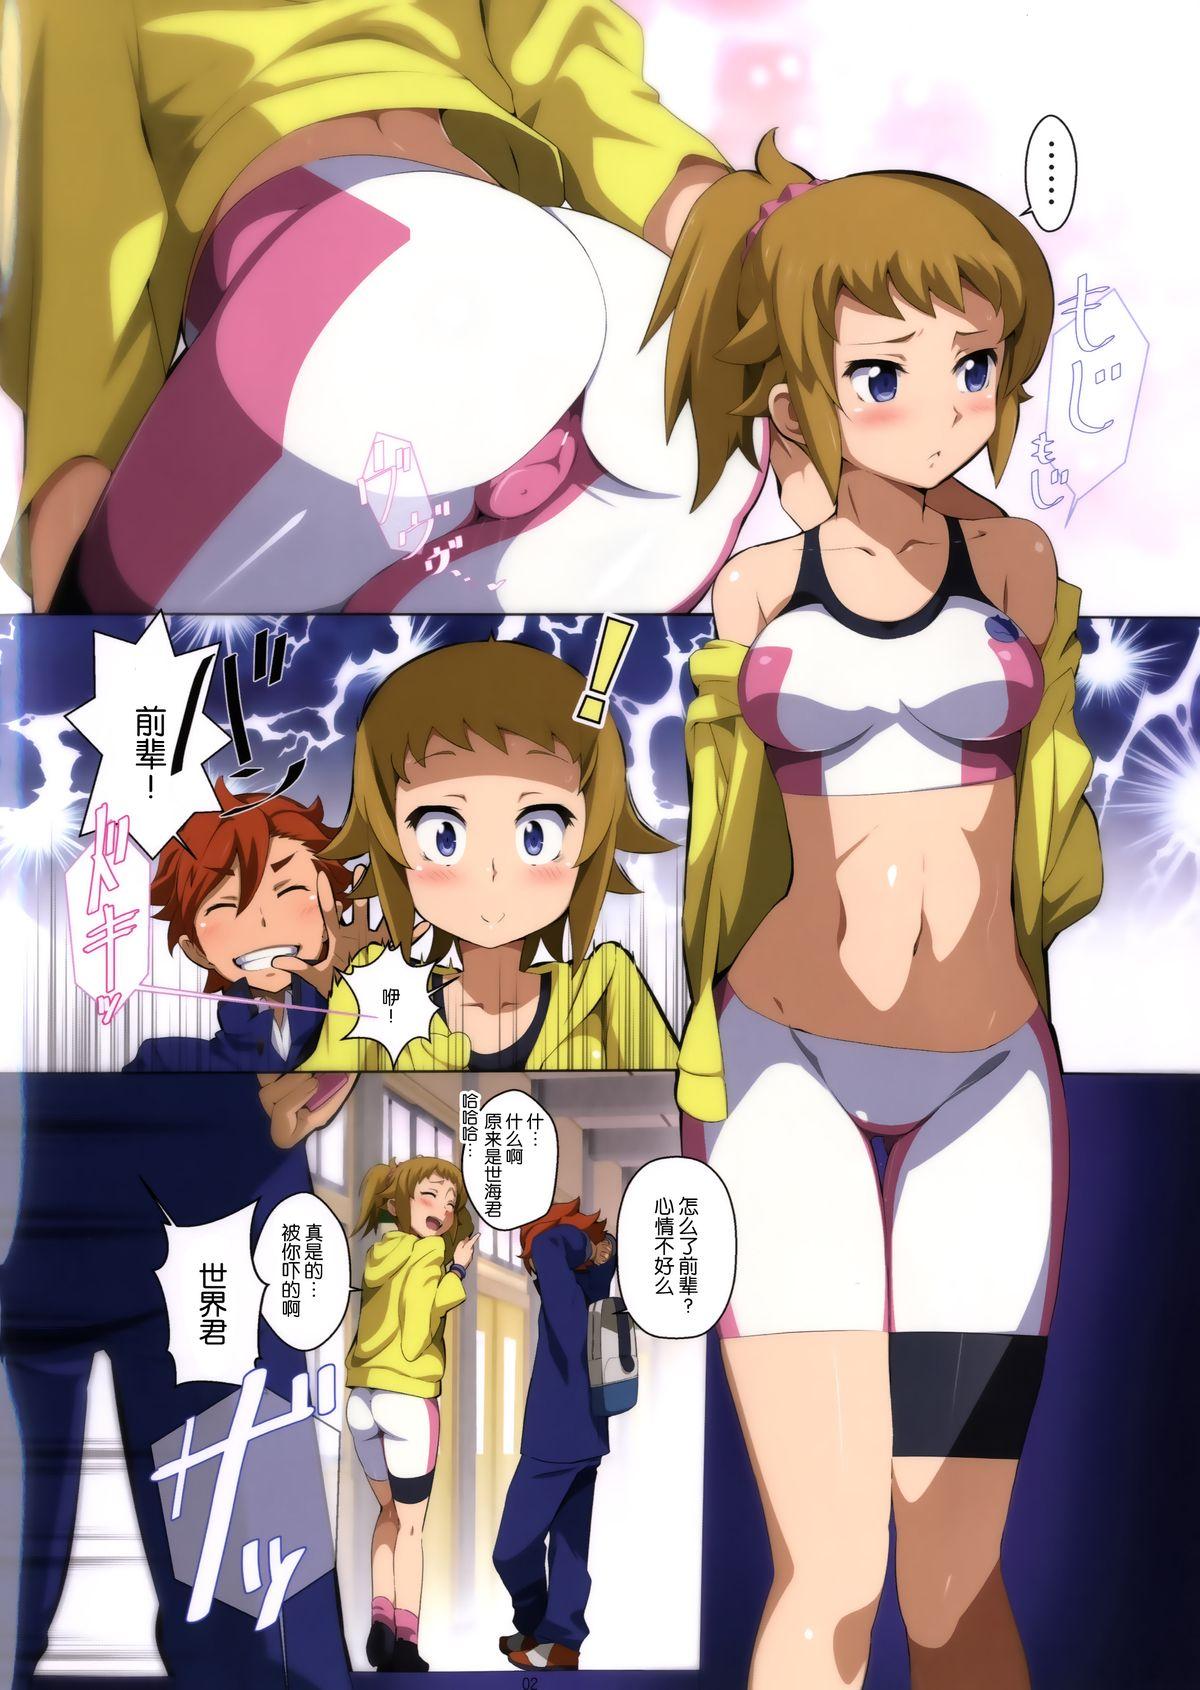 Strapon BATTLE END FUMINA - Gundam build fighters try Foursome - Page 3